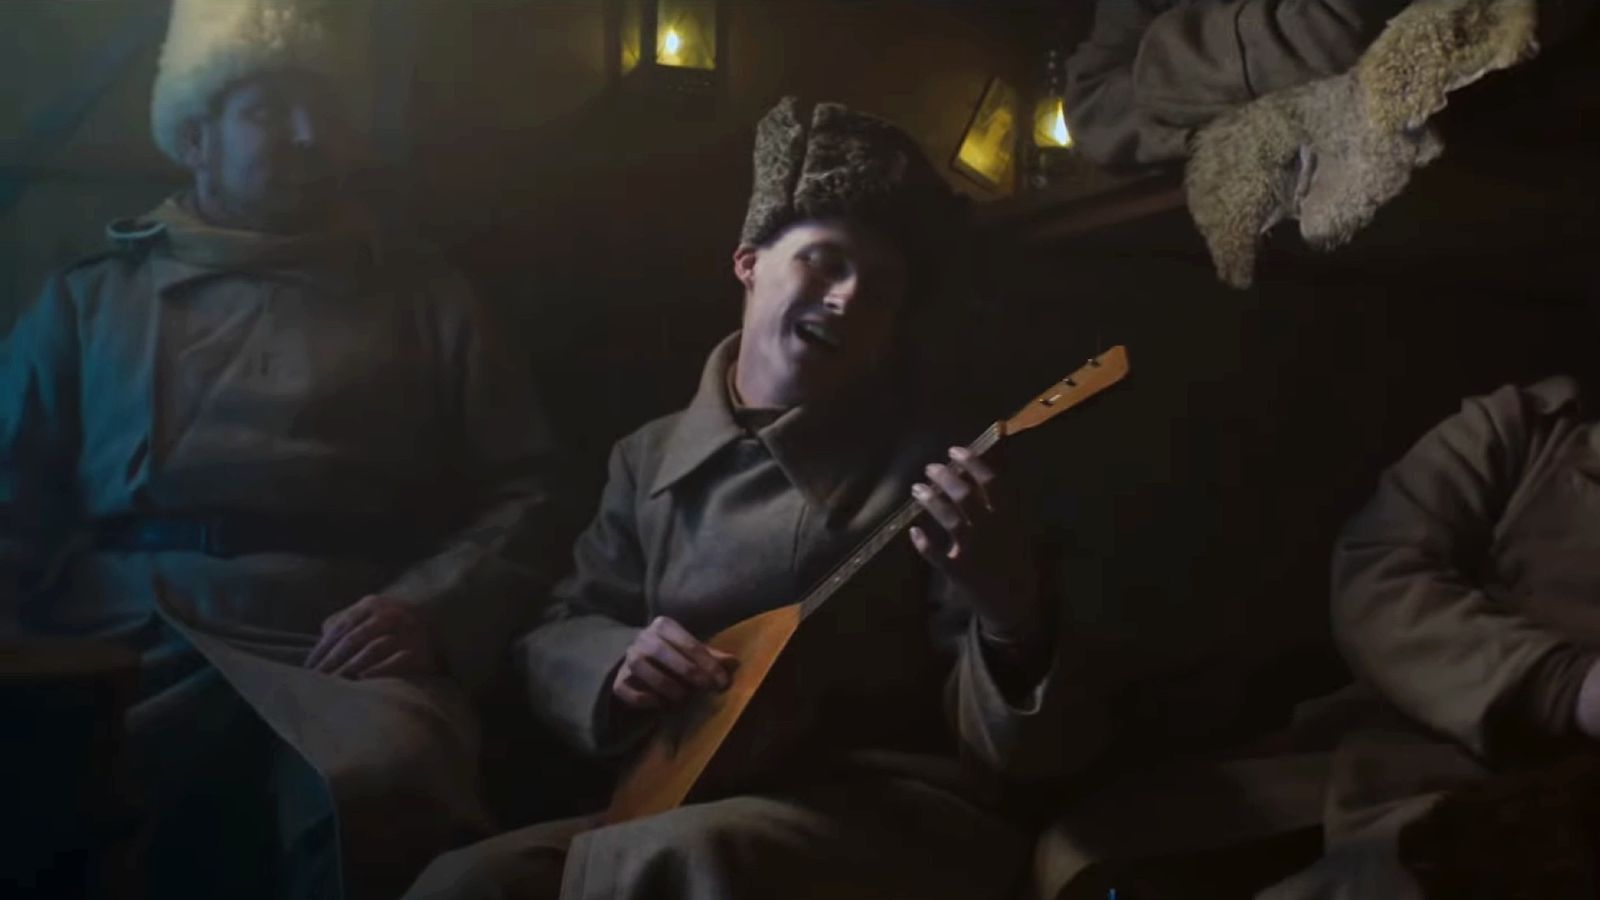 Last Train Home - soldier with guitar singing while on a train